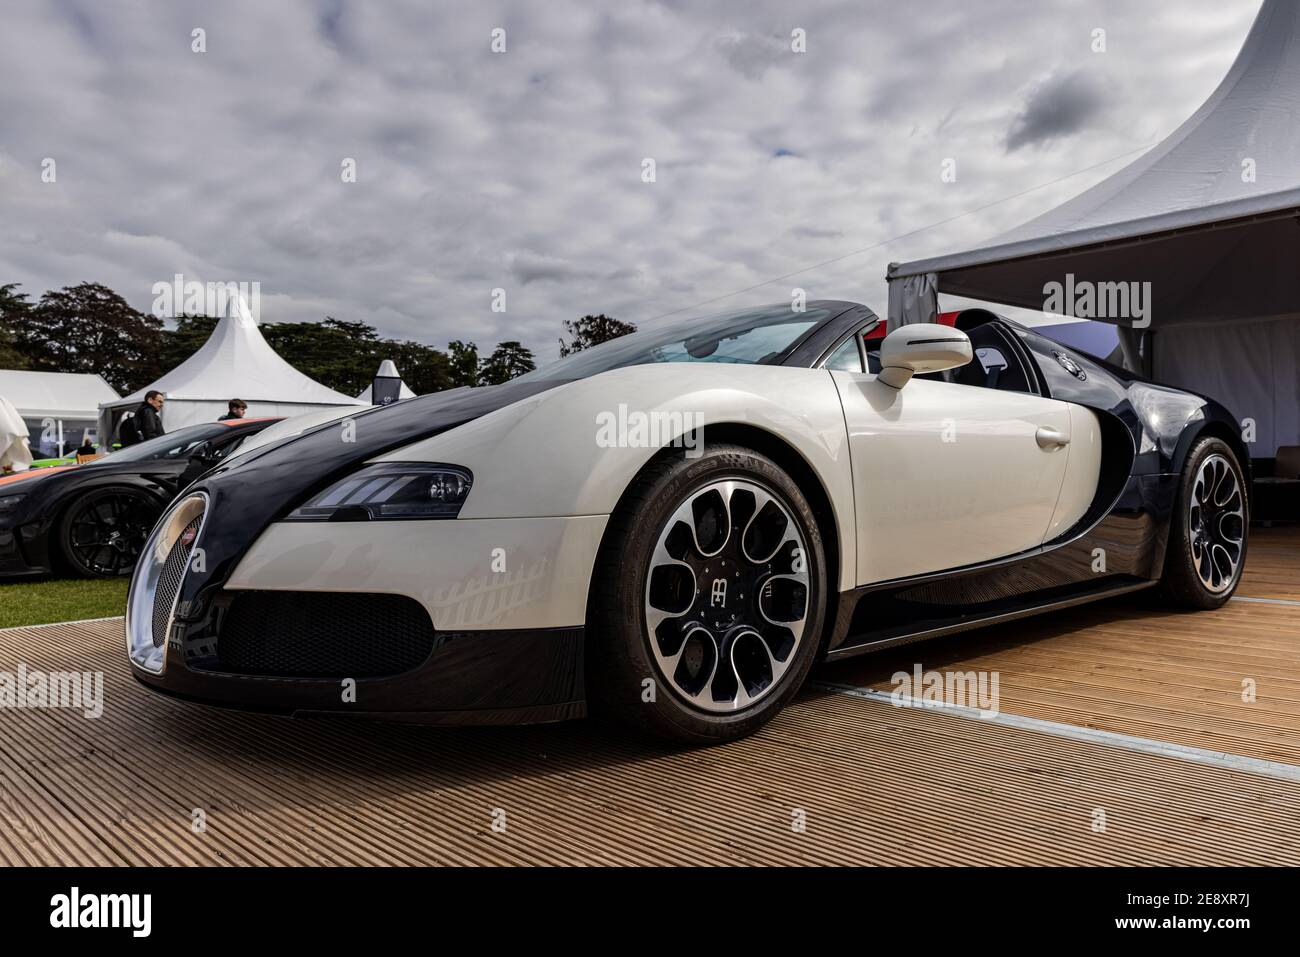 Bugatti Veyron 16.4 Grand Sport on show at the Concours d’Elegance held at Blenheim Palace on the 26 September 2020 Stock Photo